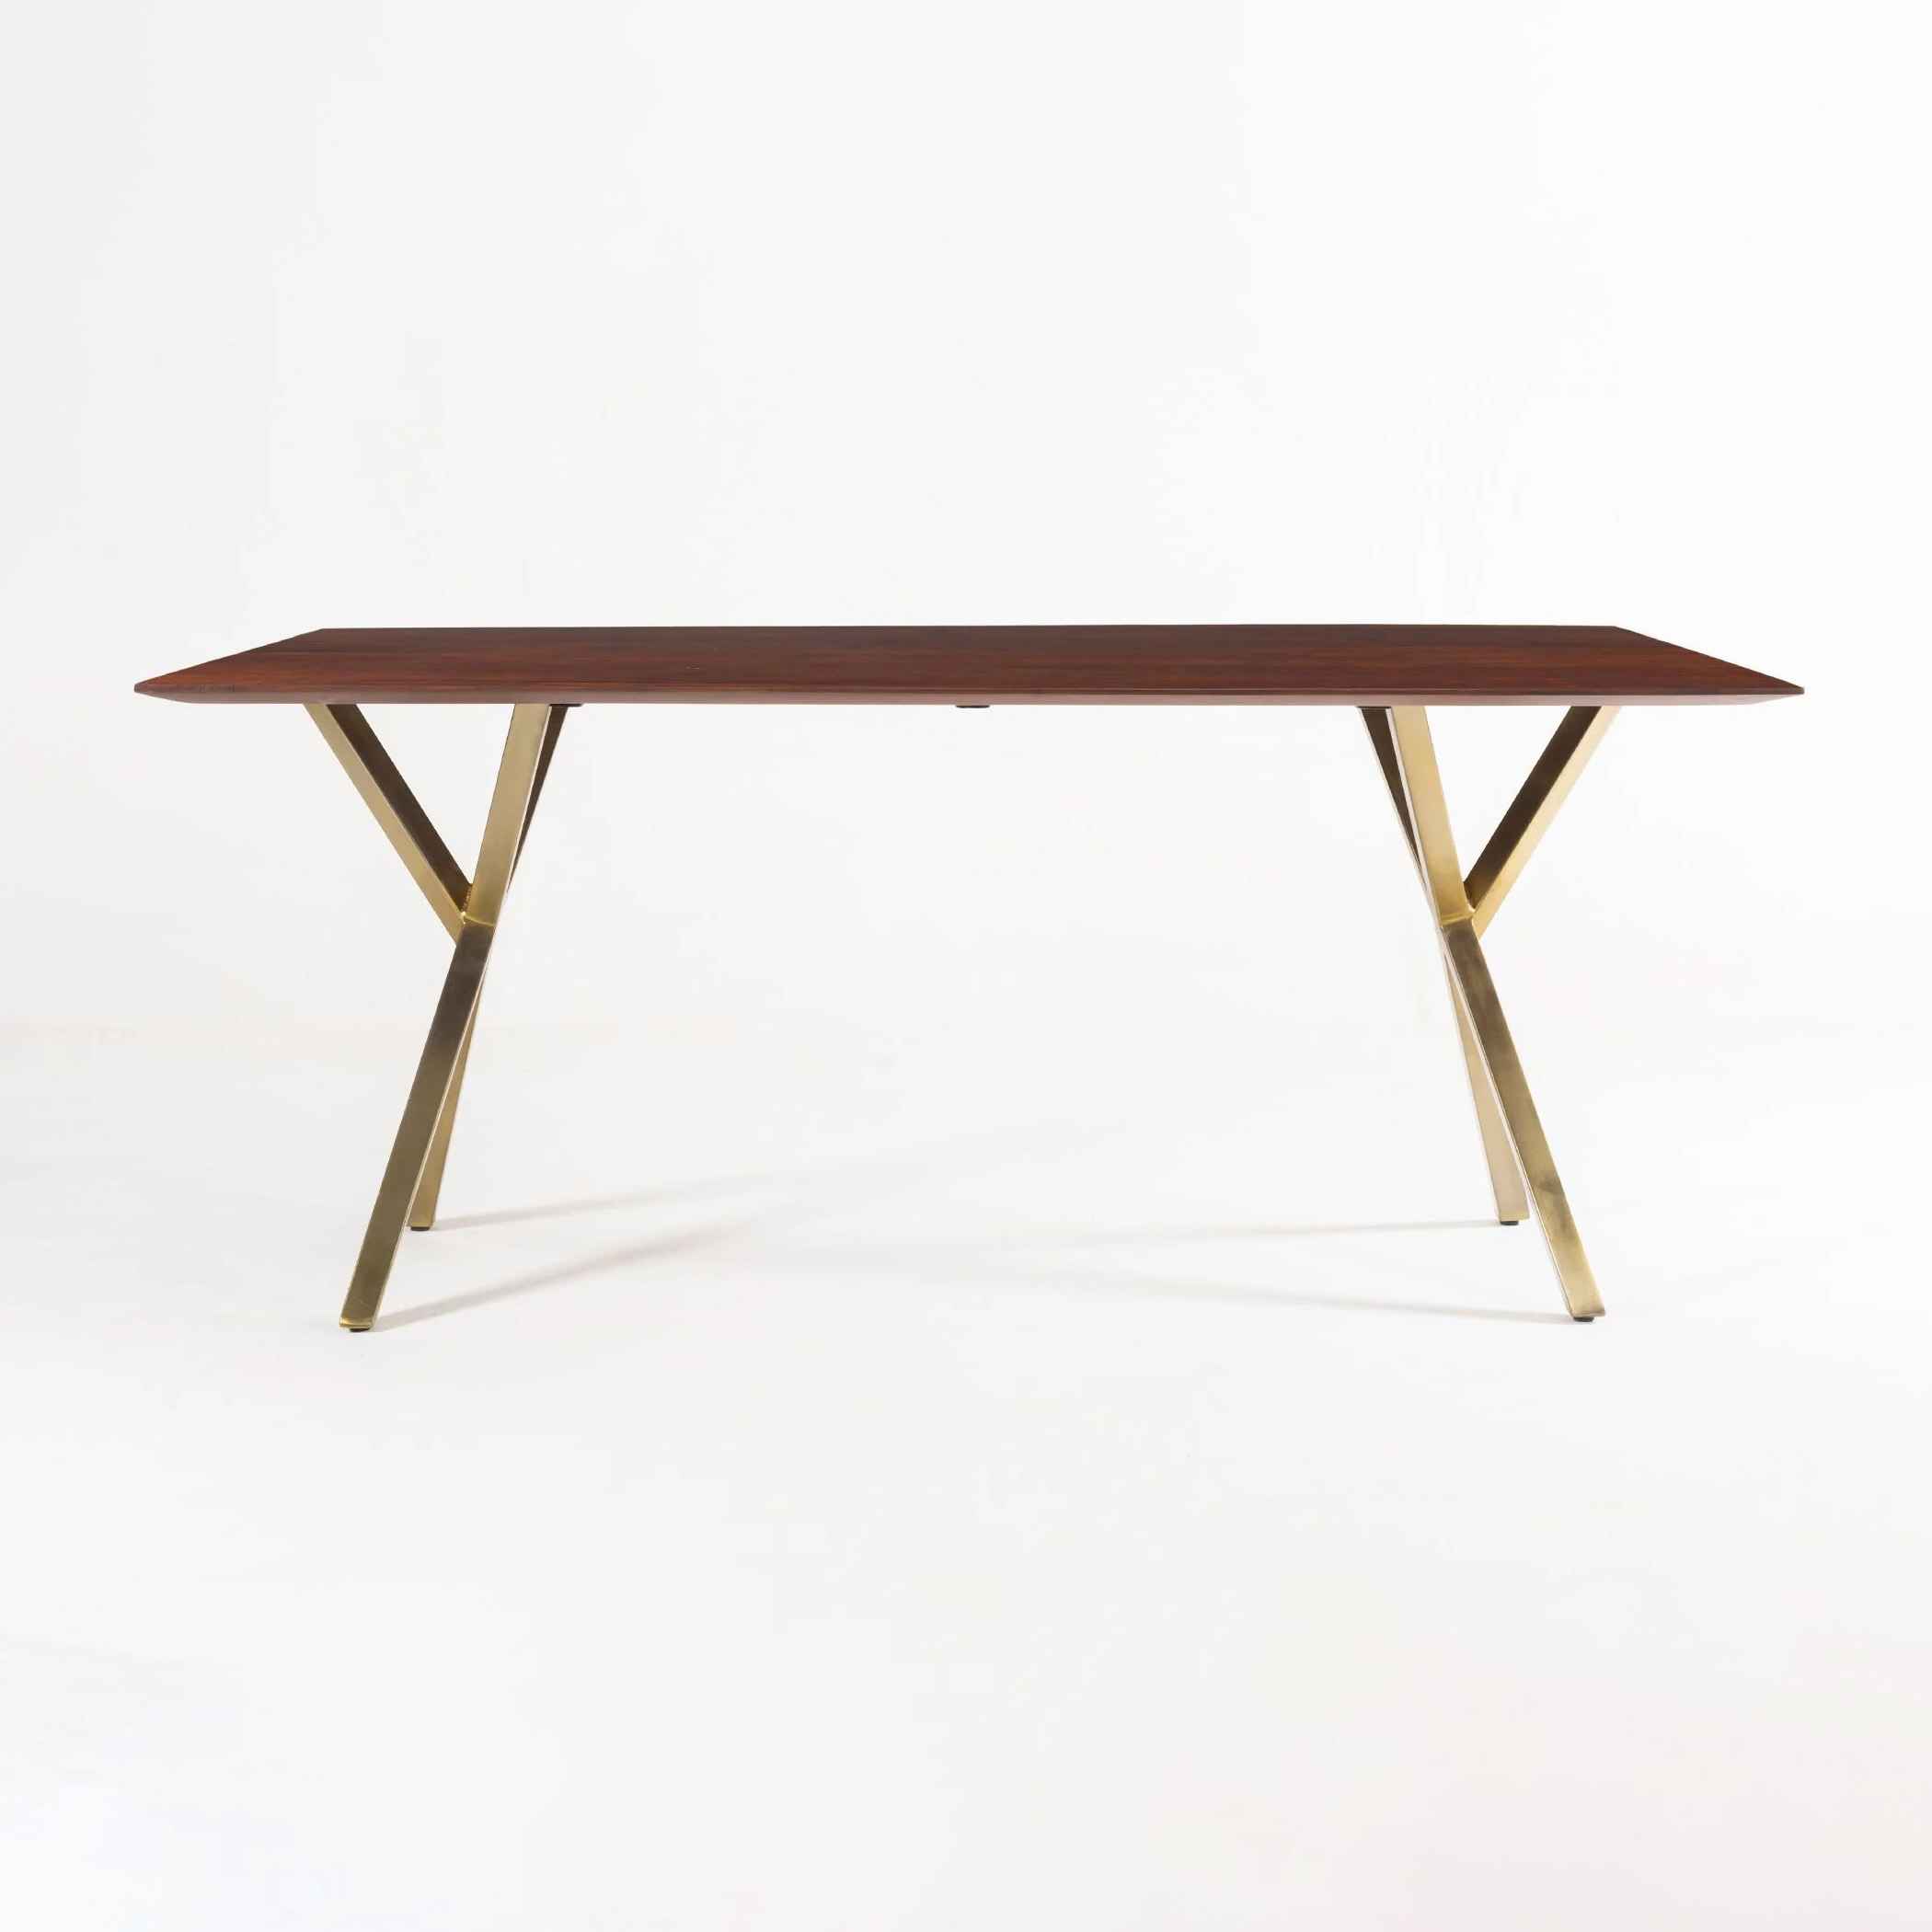 Miles Dining Table with Bench and 2 Chairs